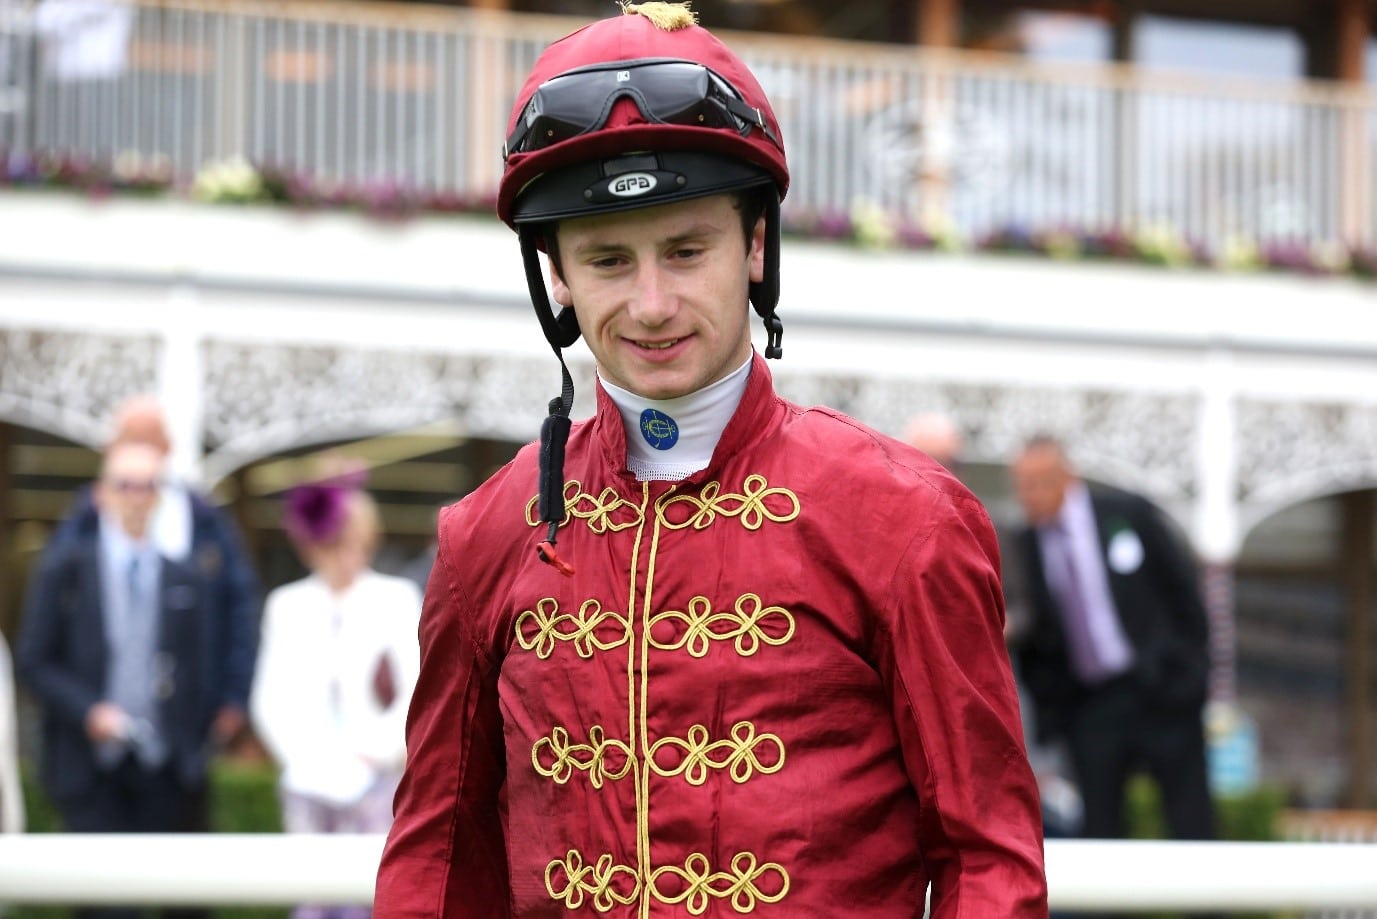 A Look Back at Some of Oisin Murphy’s Biggest Wins as He is Crowned Champion Jockey for the Third Successive Season